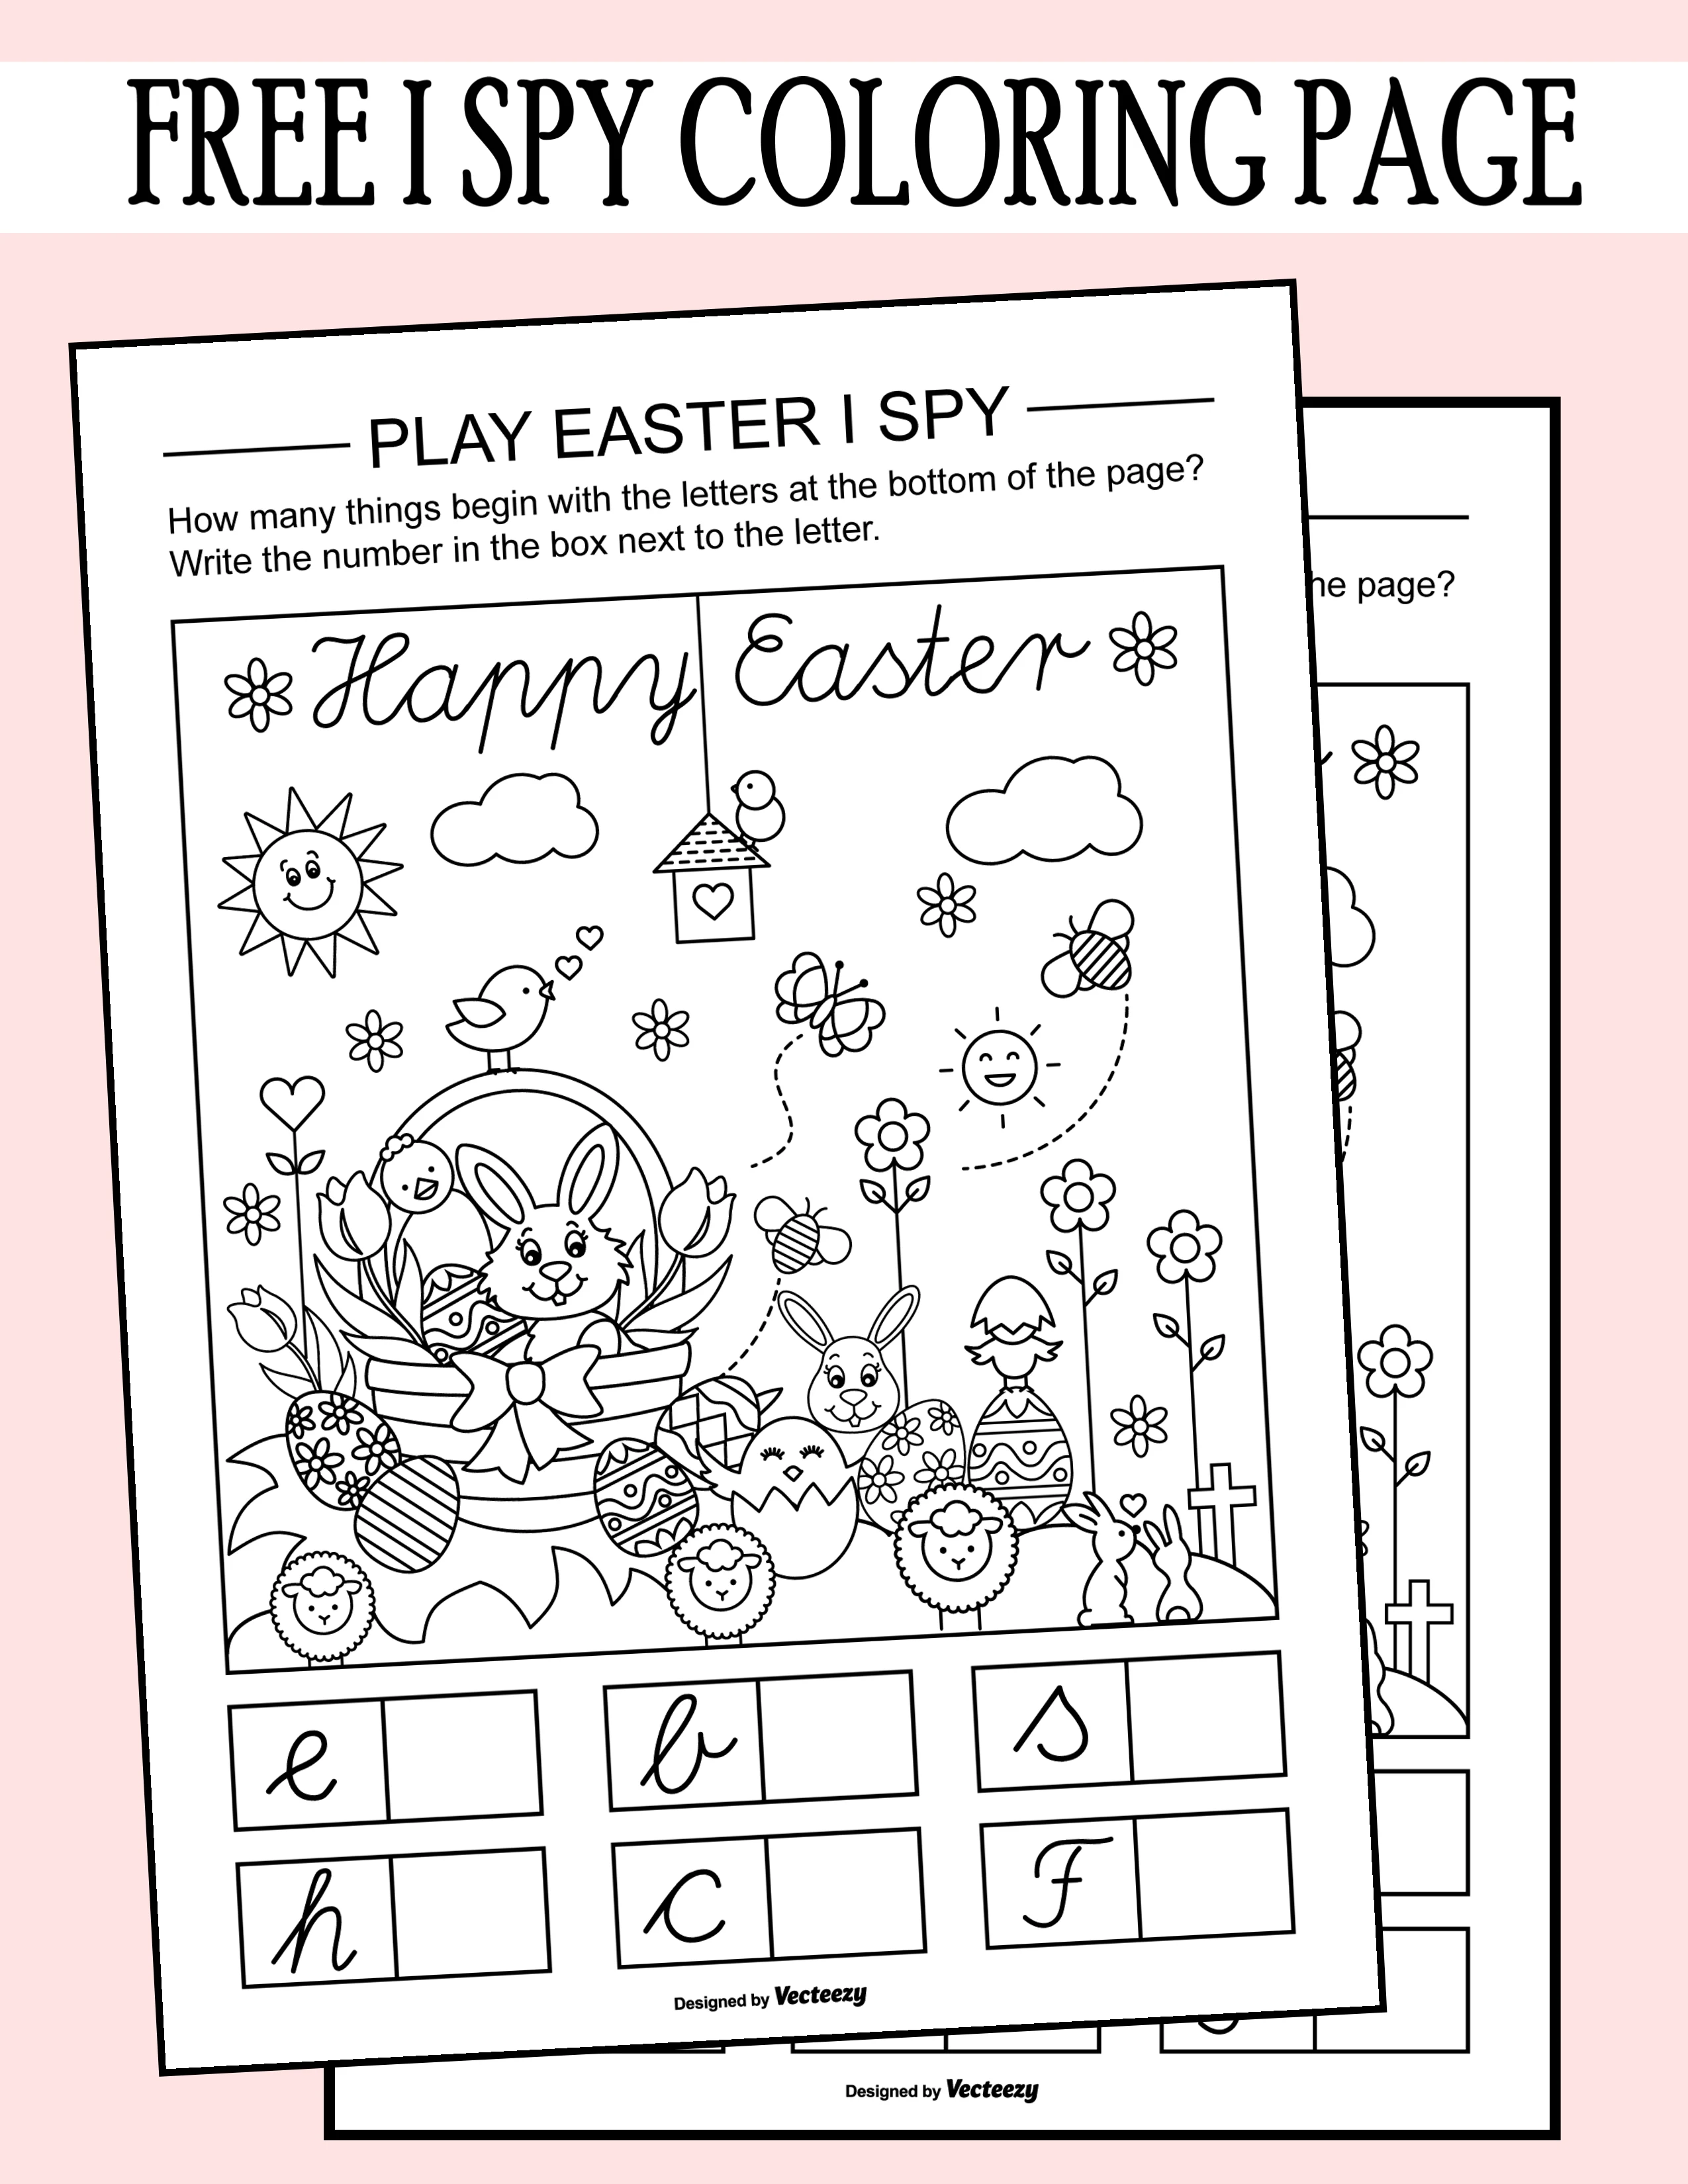 Easter i spy coloring page printable worksheet fun for kids of all ages